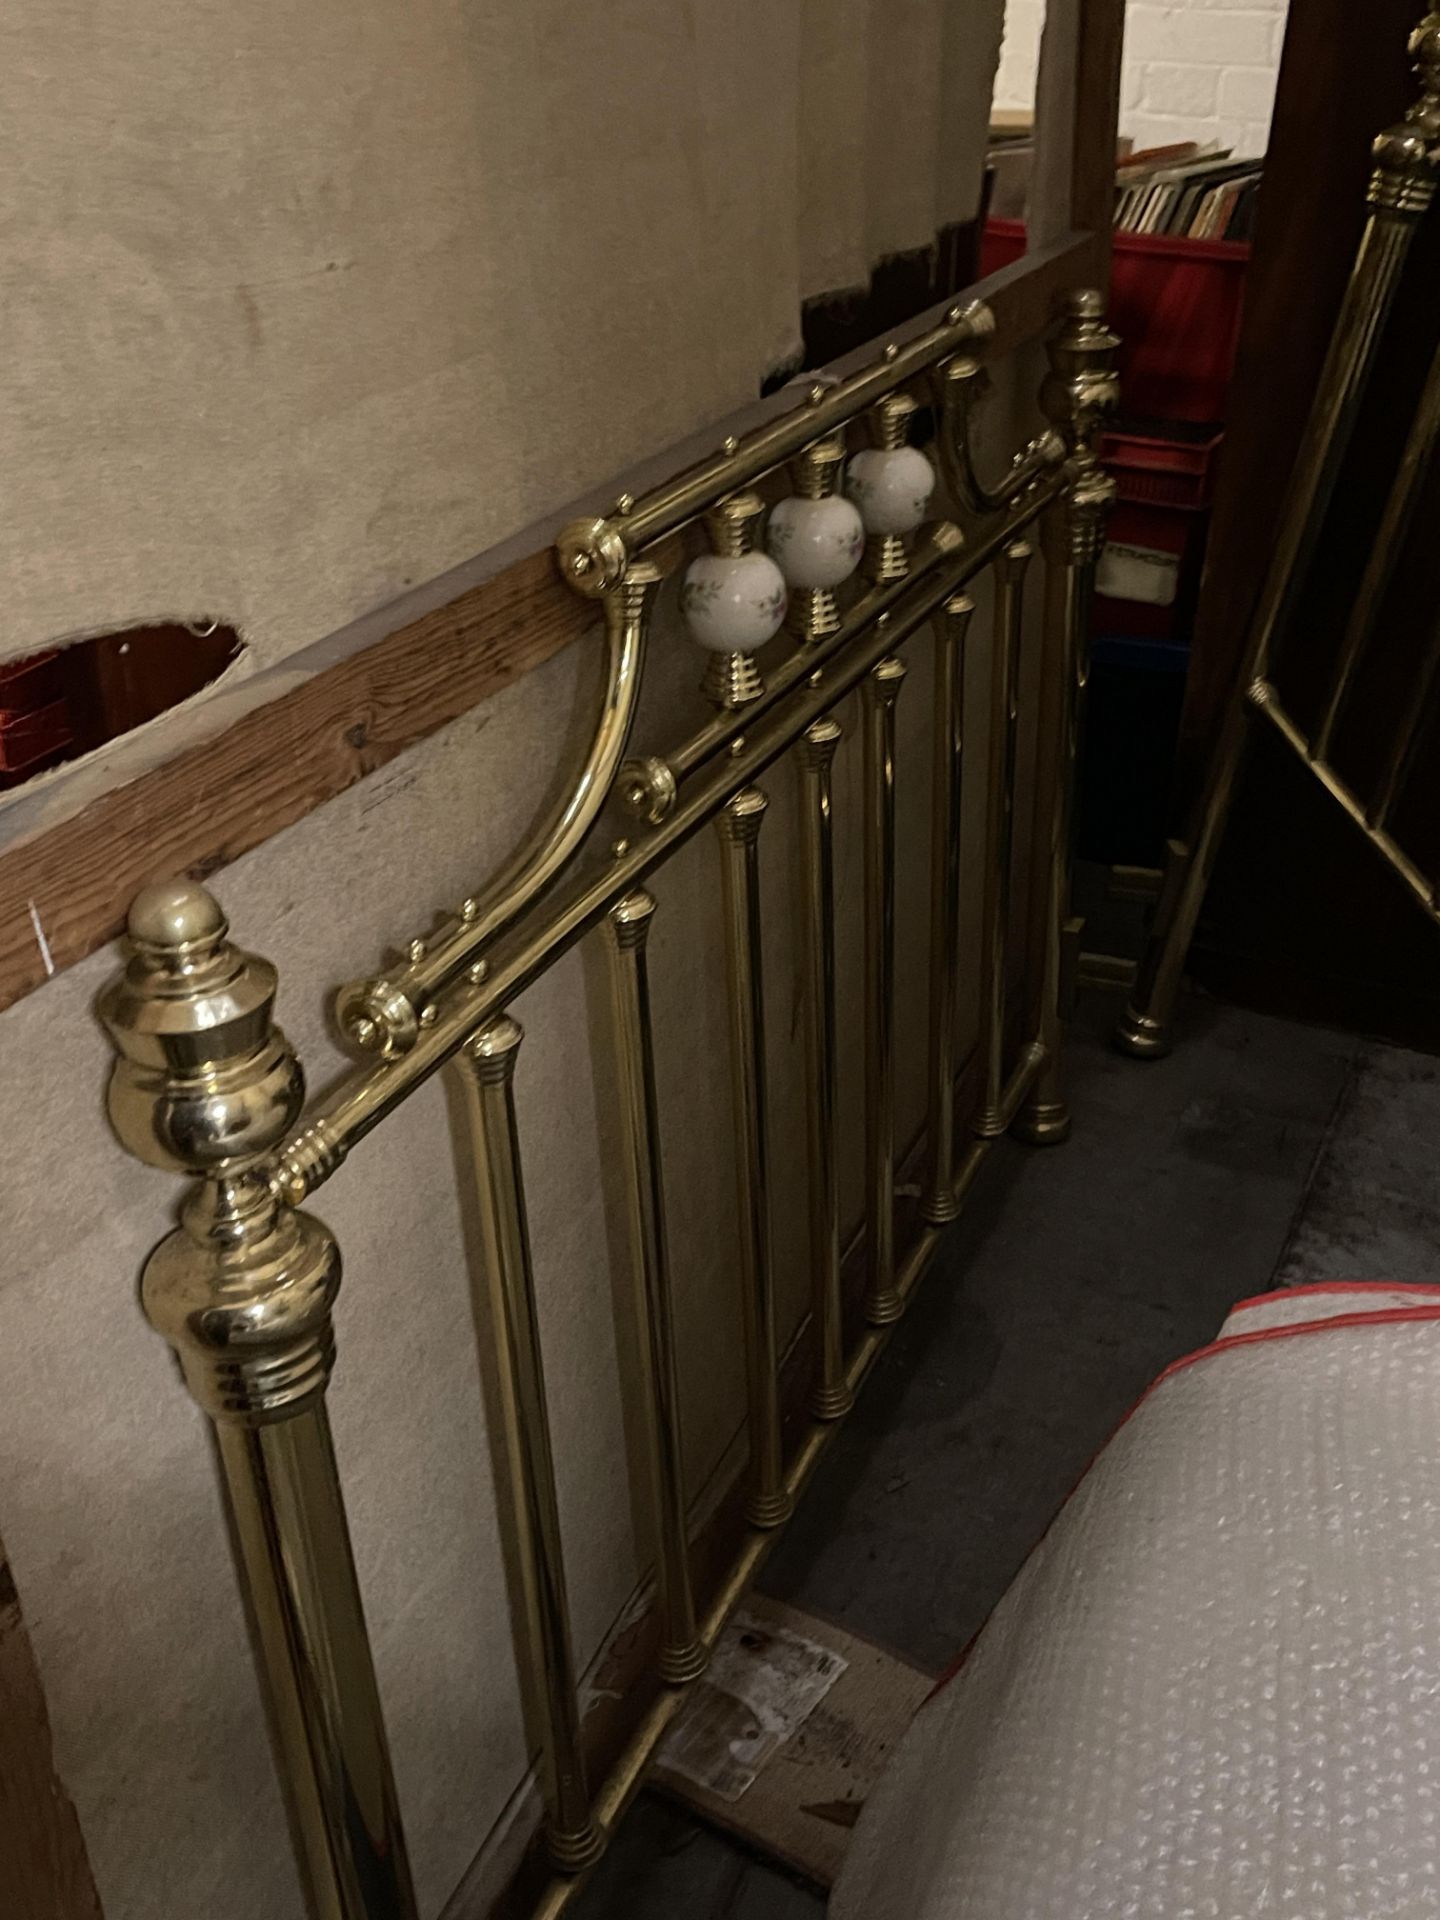 Brass double bed frame very old unclaimed property - Image 7 of 8